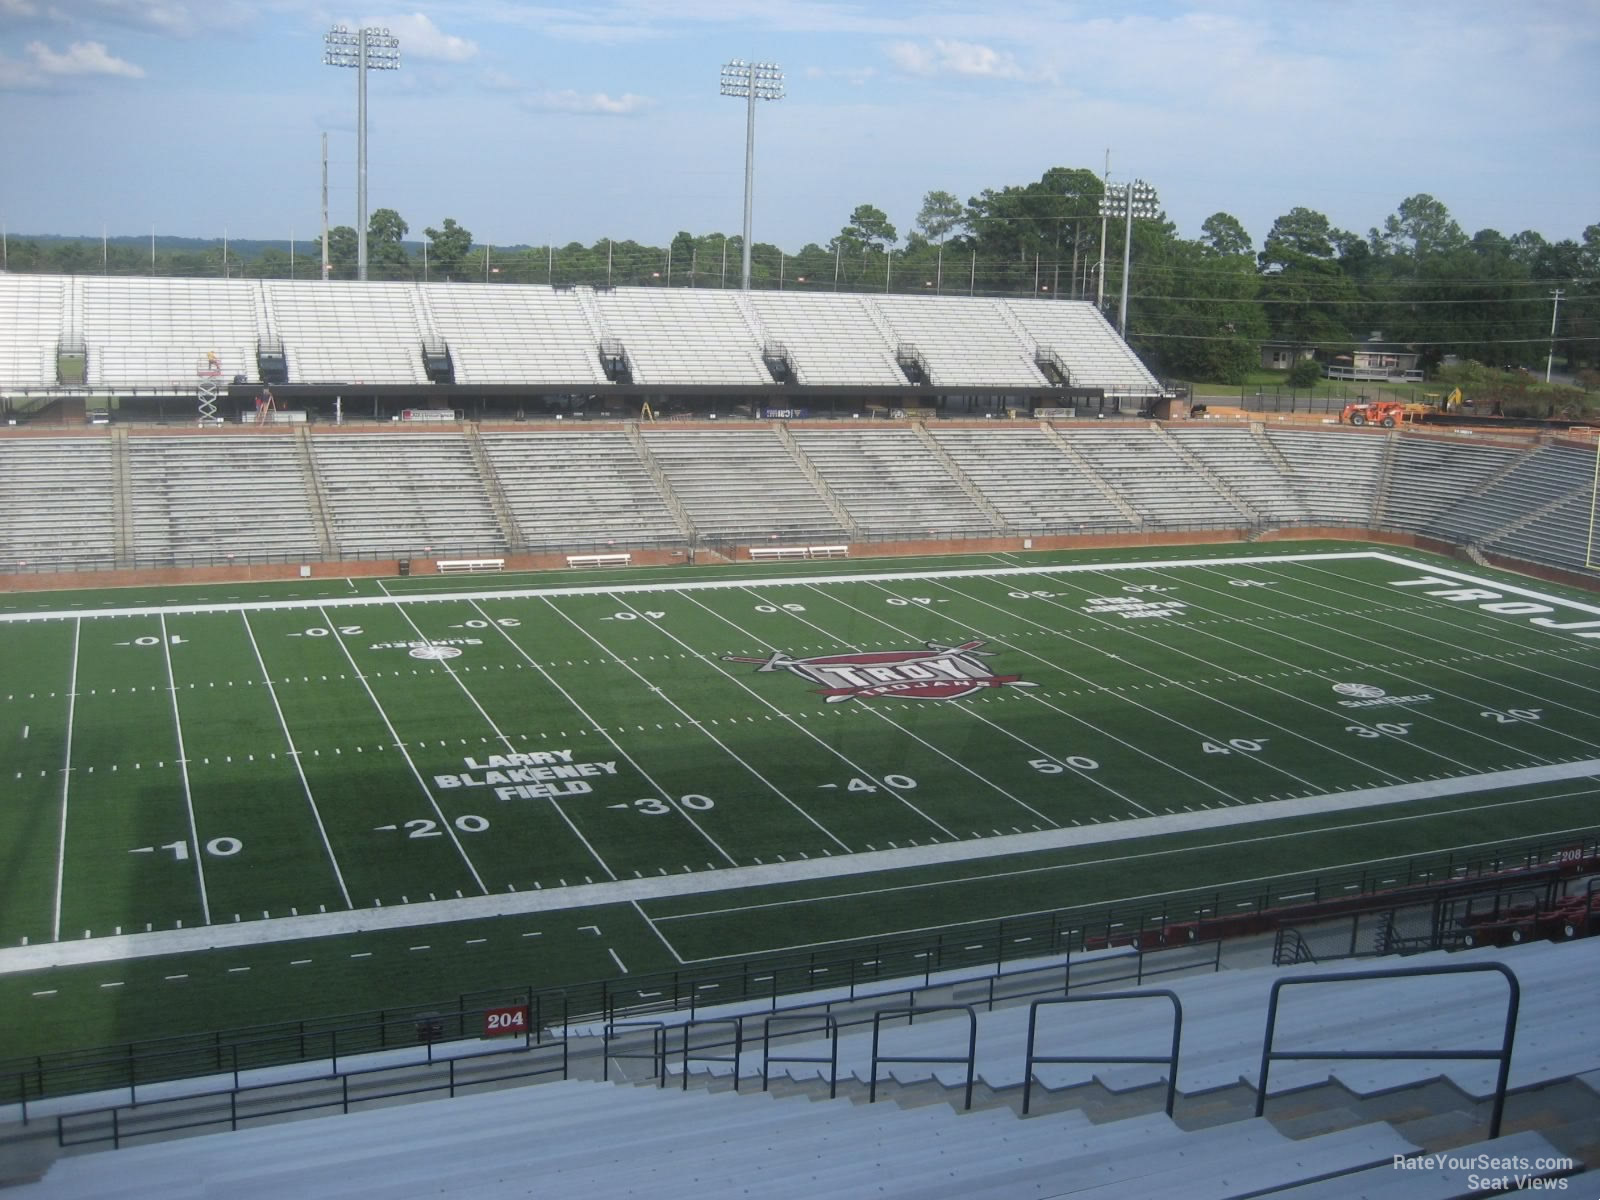 section 204, row 30 seat view  - troy memorial stadium